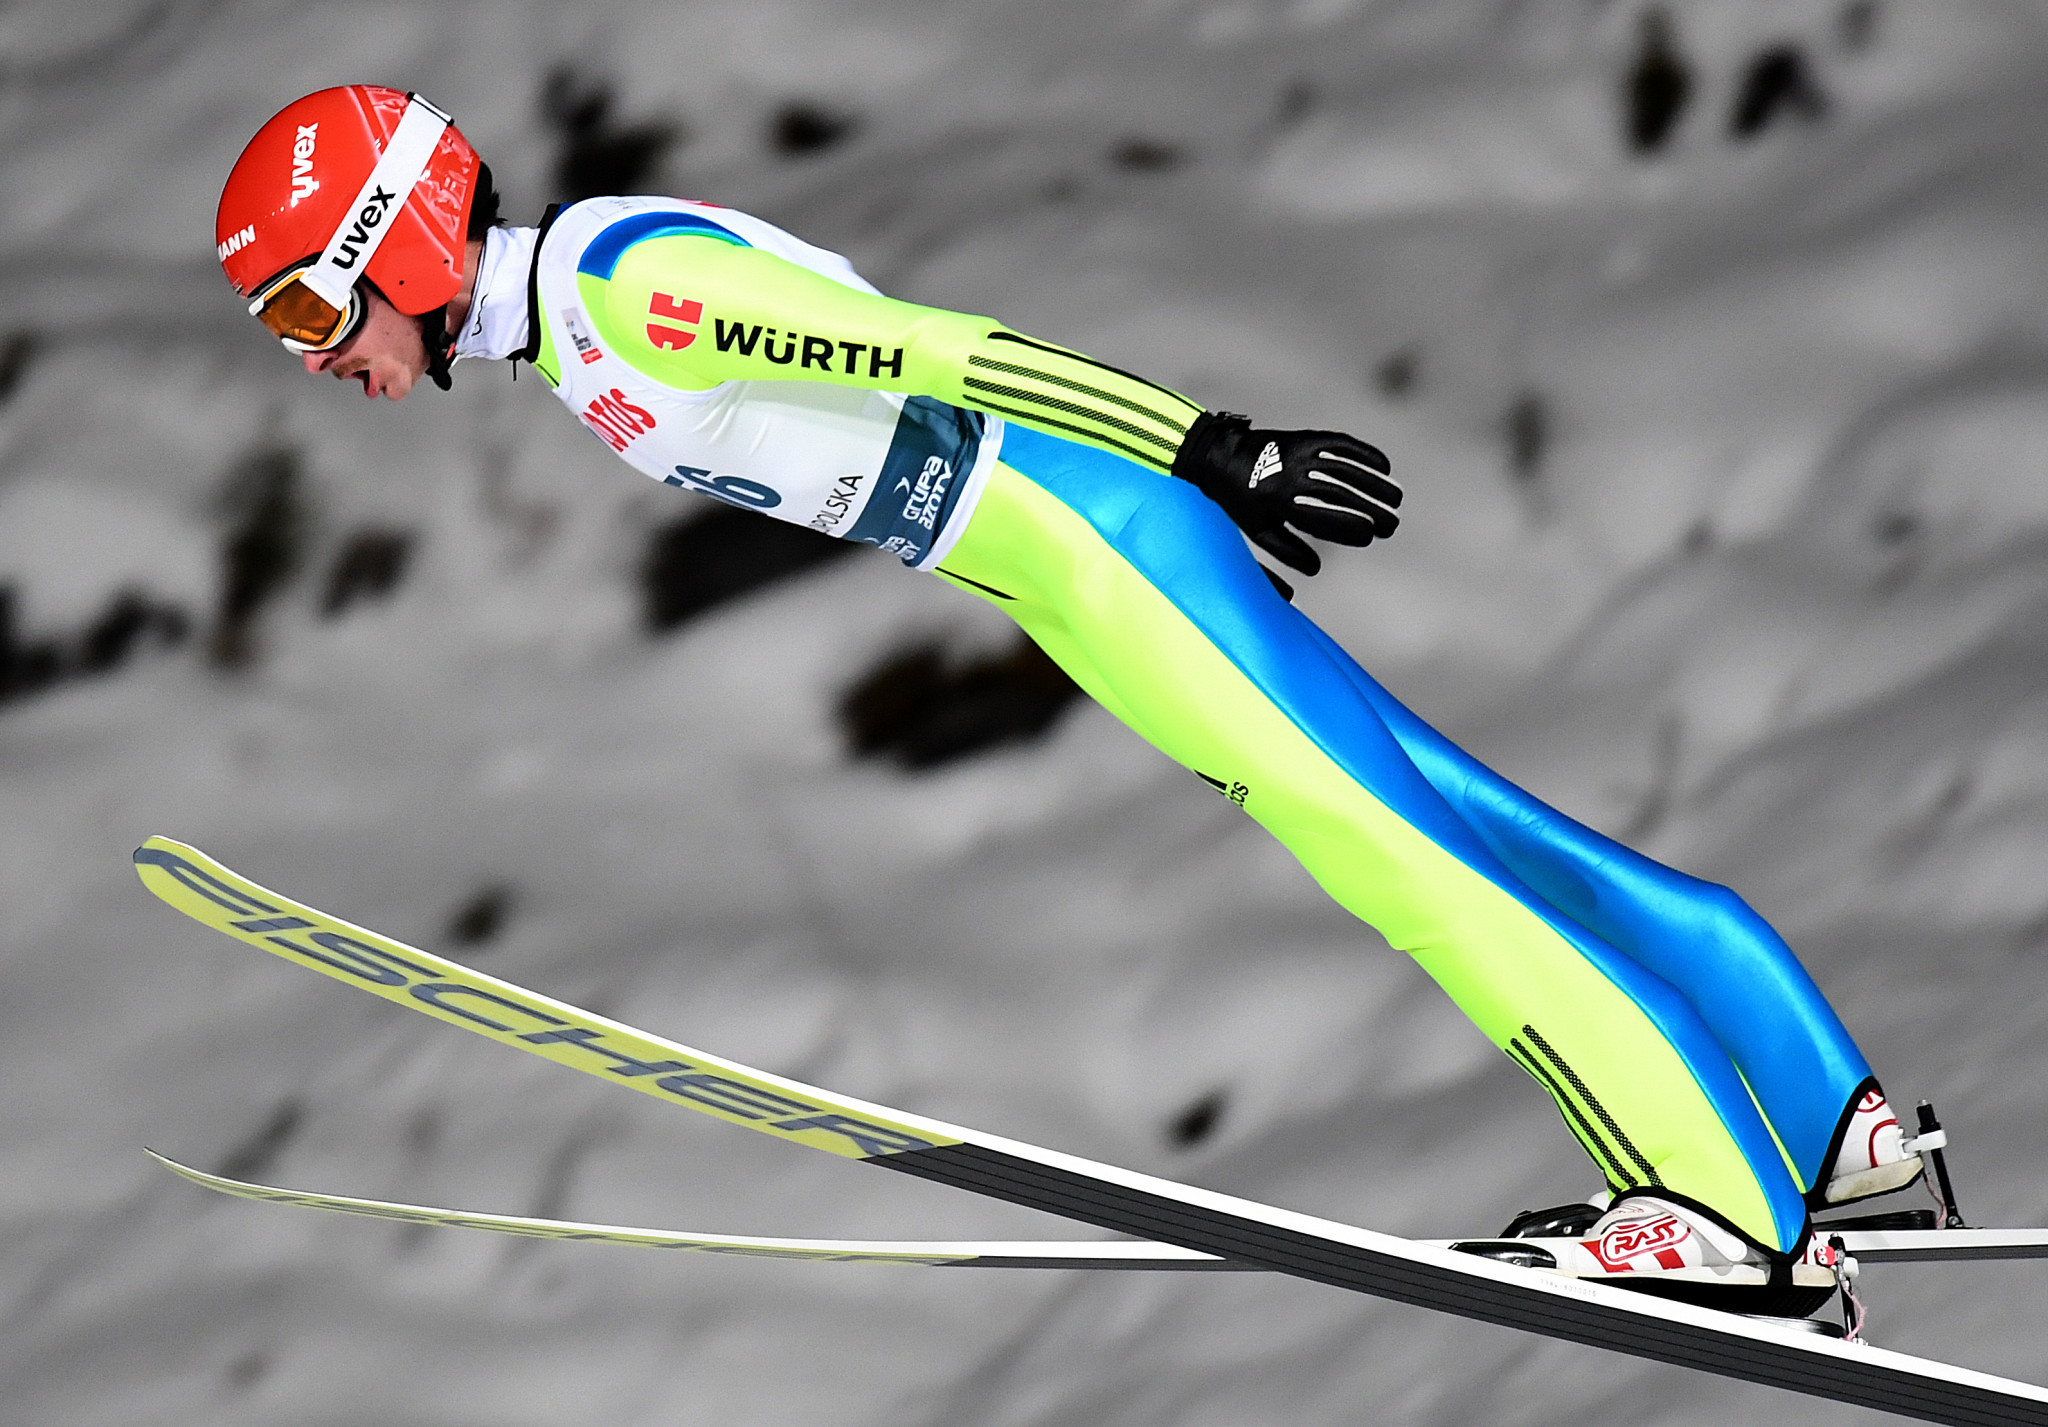 FIS Ski Jumping World Cup moves to Willingen for final event before Pyeongchang 2018